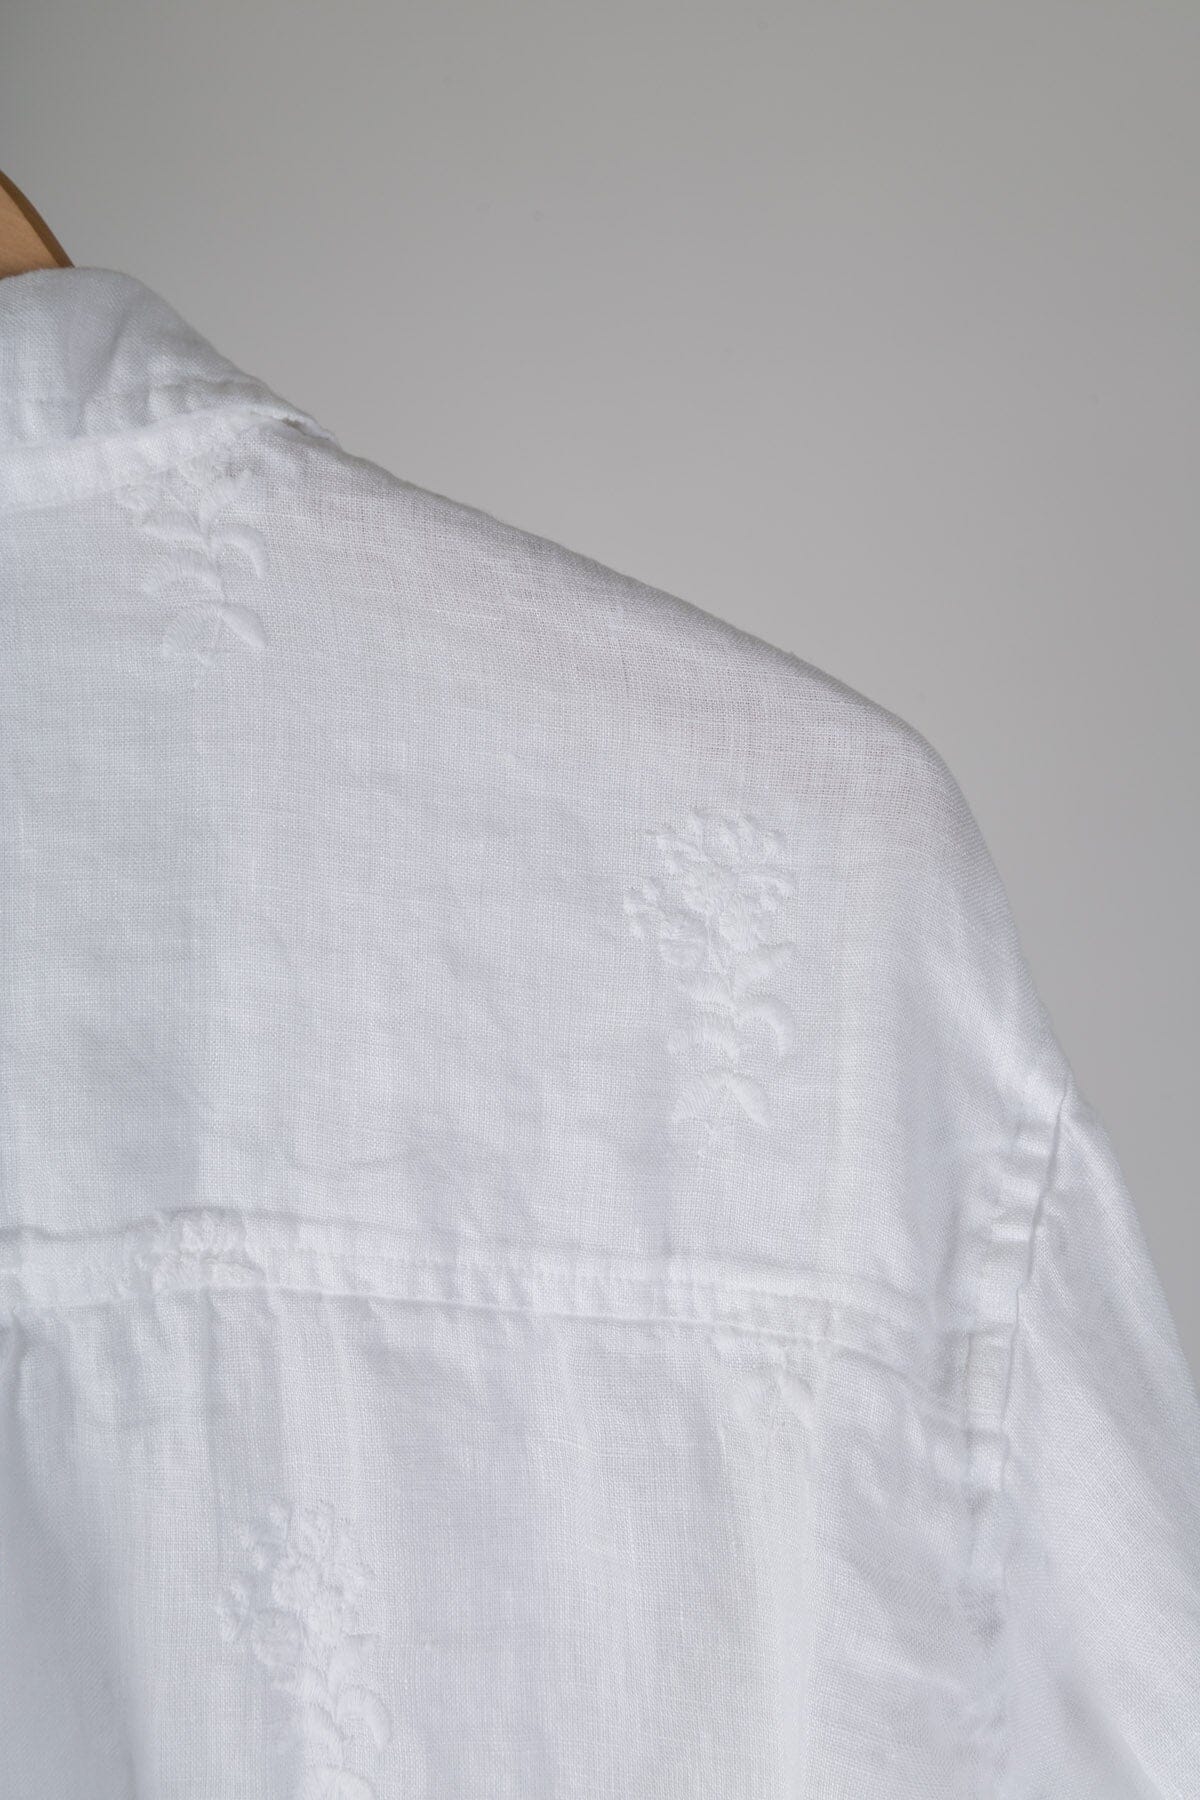 Joss - Embroidered Linen S16 - Embroidered Linen CP Shades 